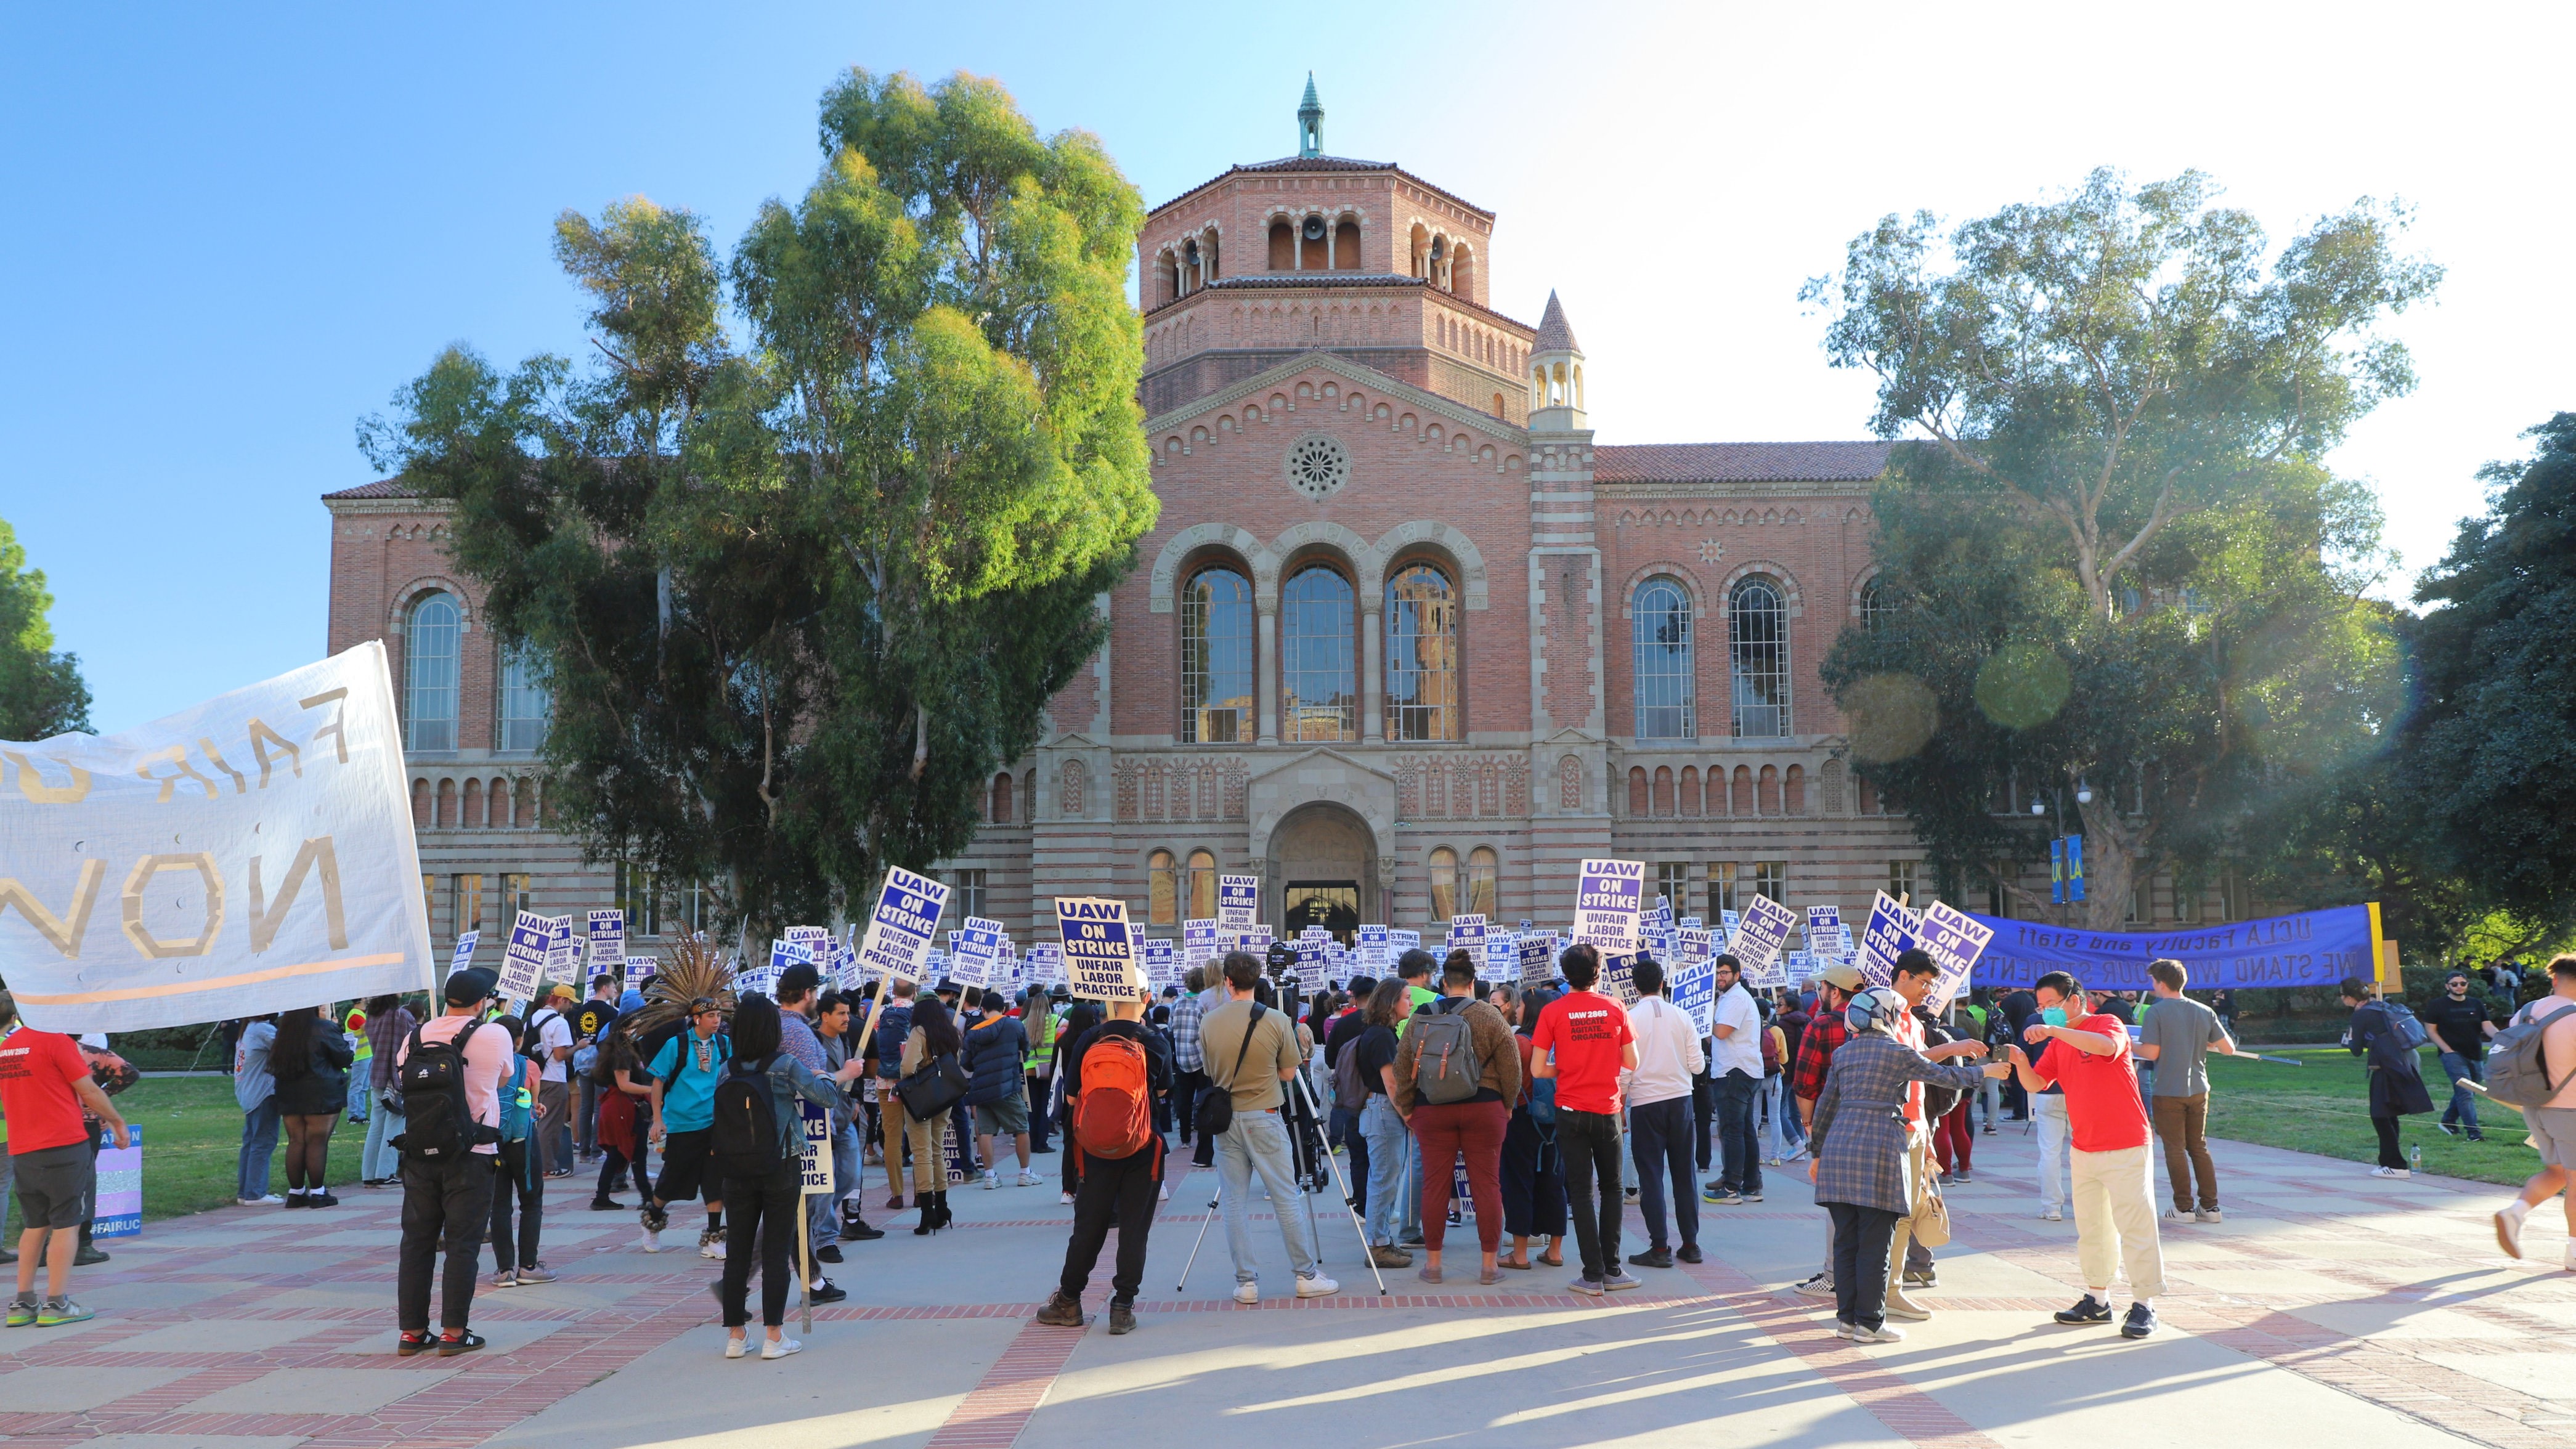 University of California workers strike for a more equitable future in education (op-ed)